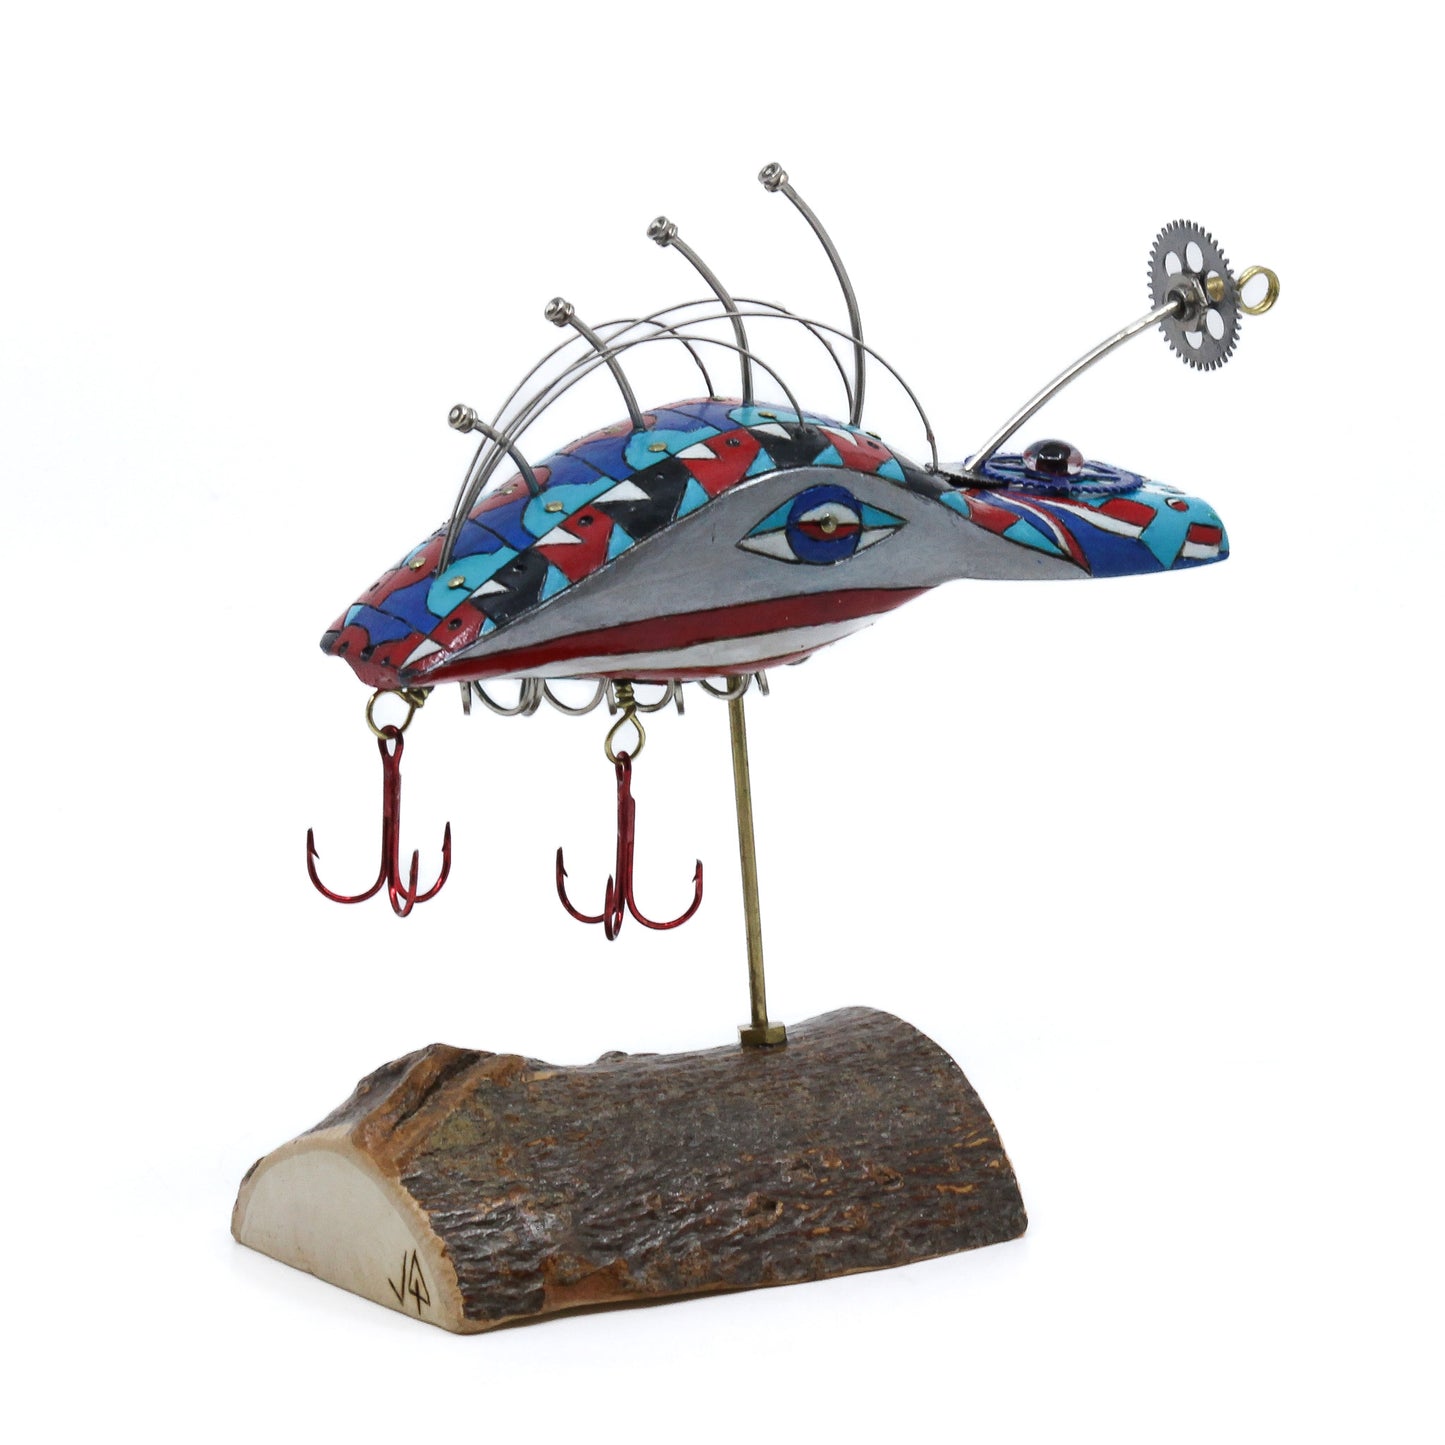 Fish made from fish lures and found objects